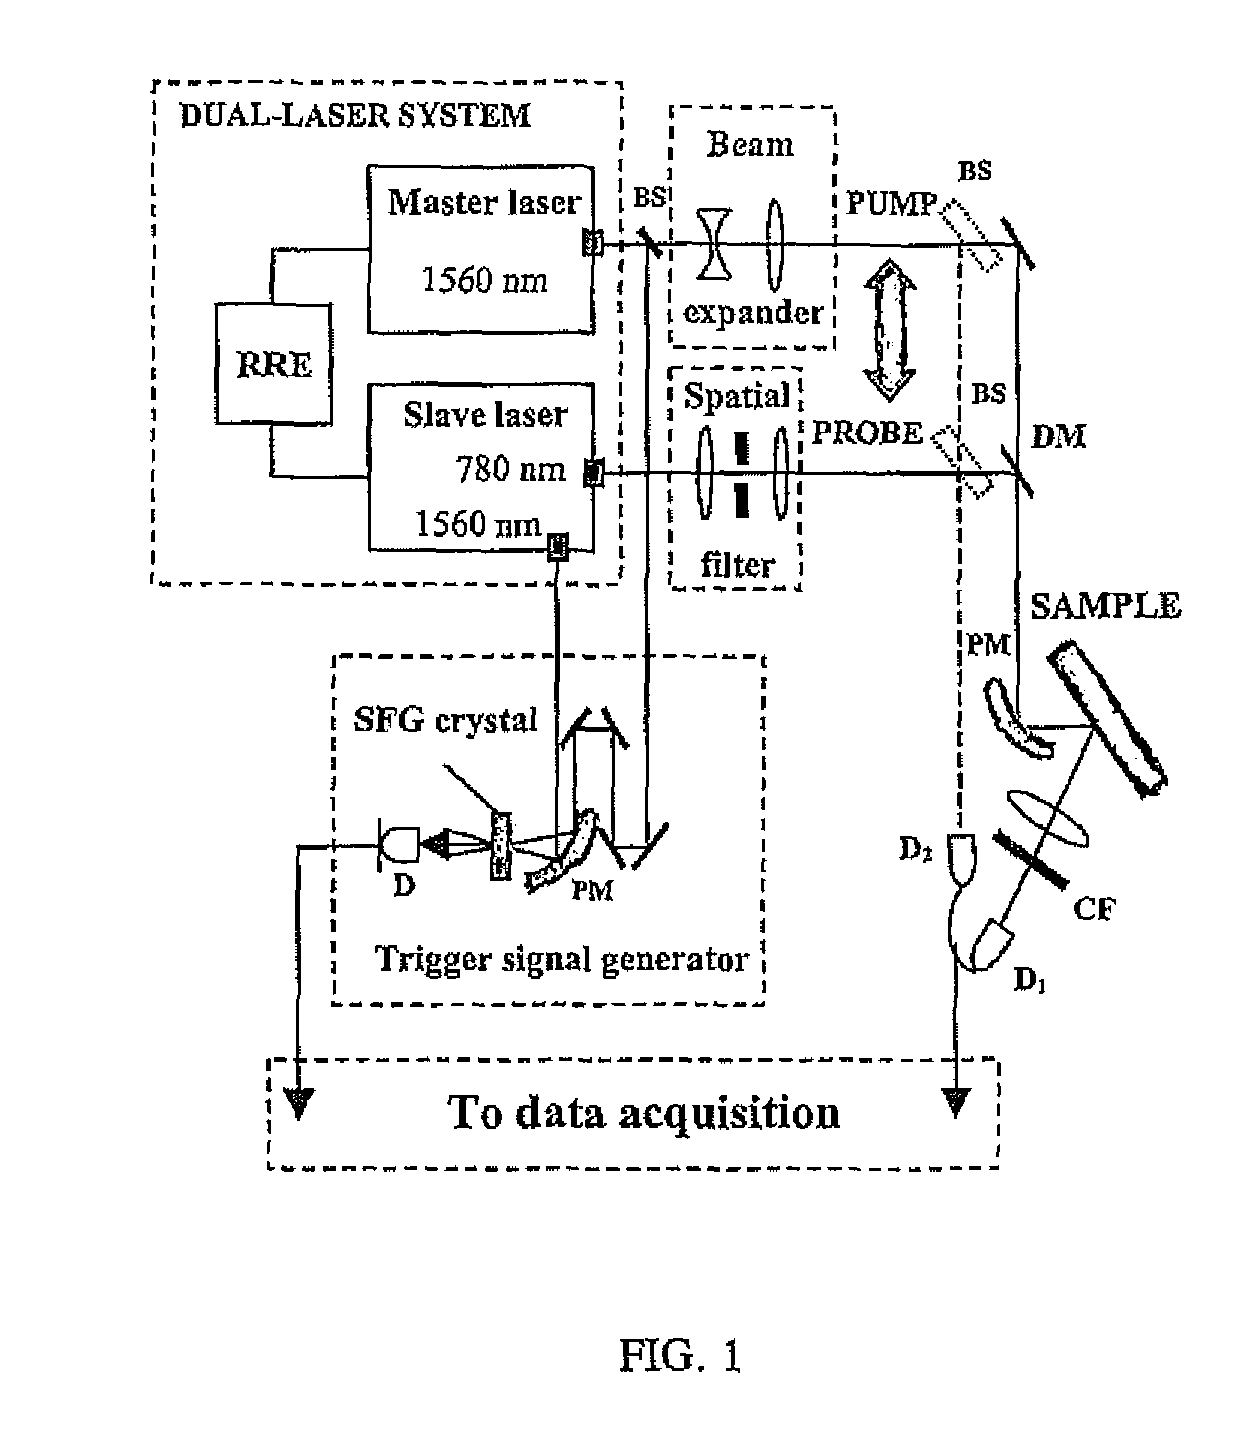 Method and system for measuring at least one property including a magnetic property of a material using pulsed laser sources